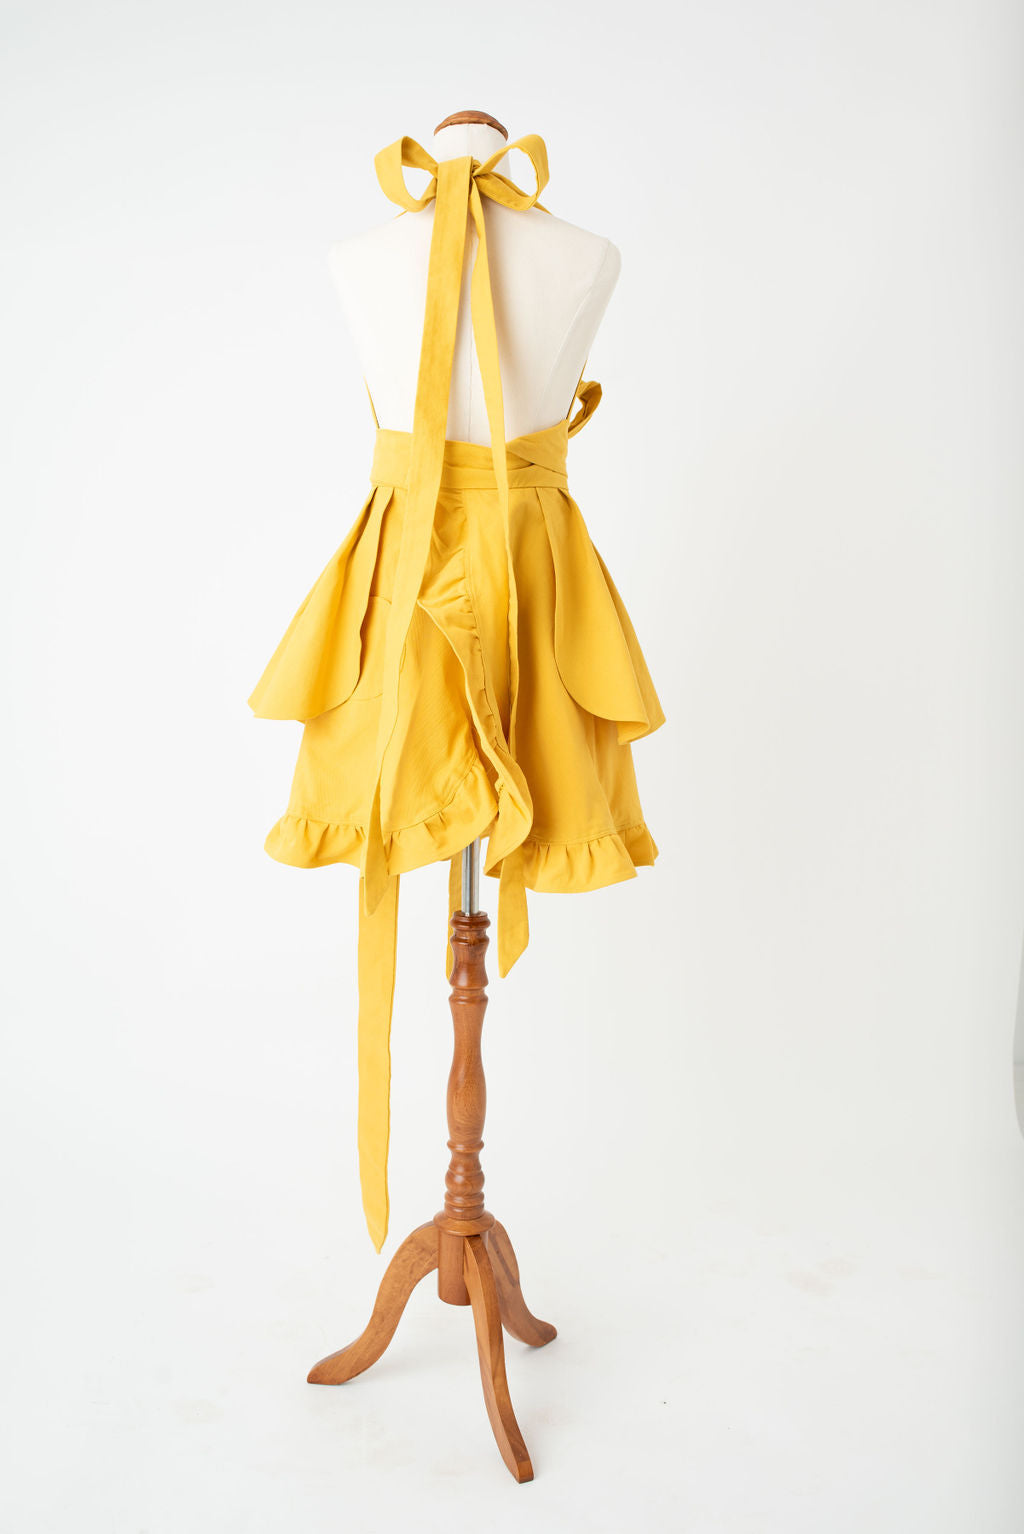 High waist hostess apron in yellow by Pretty Made - back bow